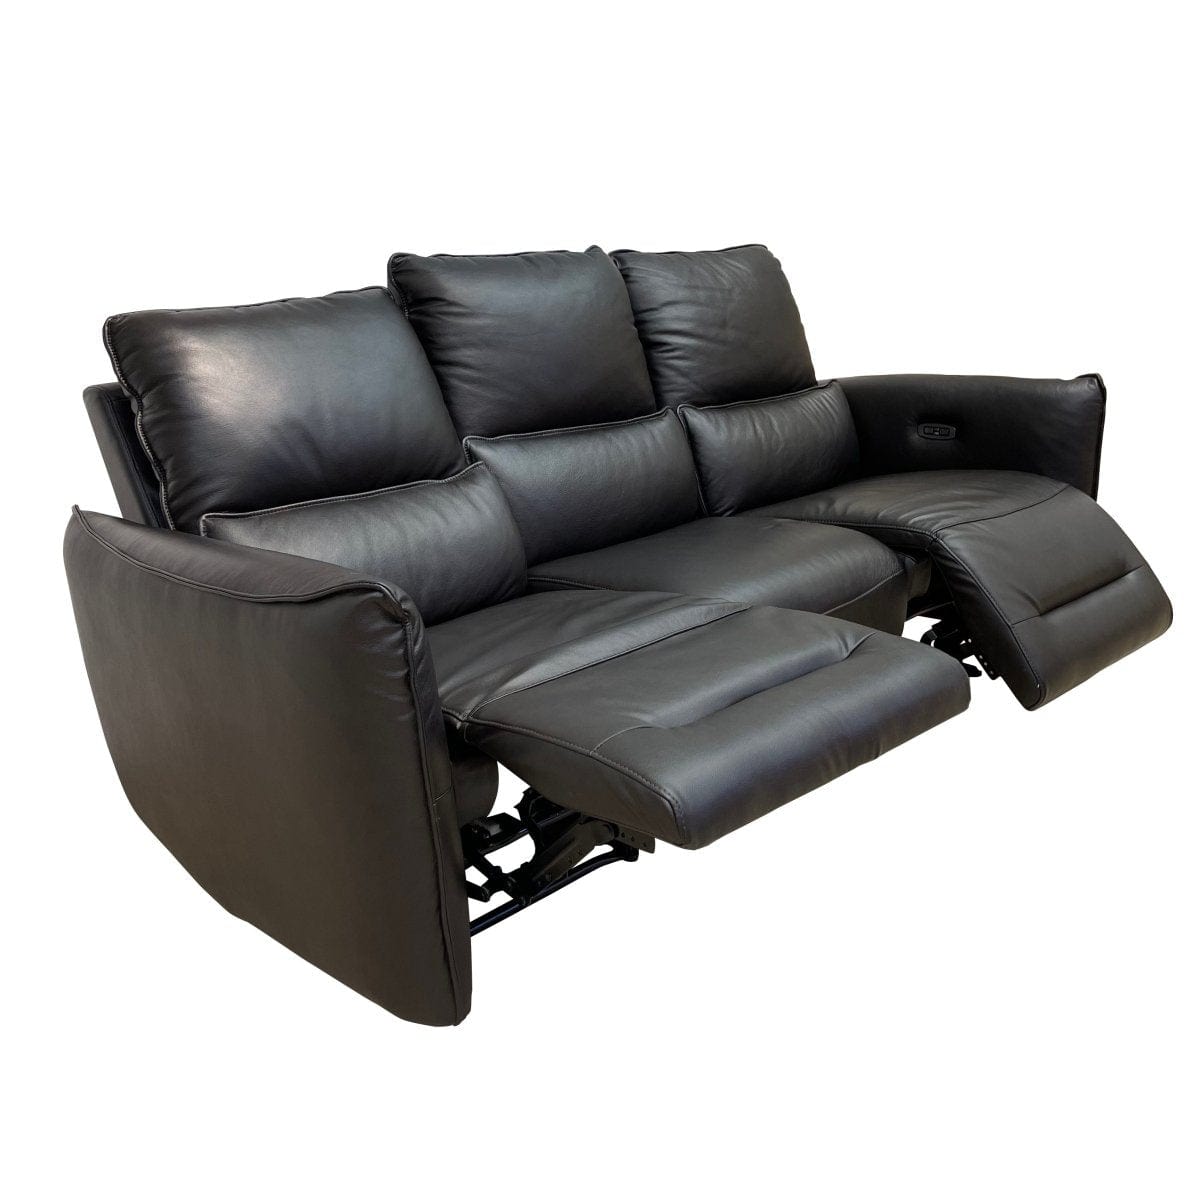 Full-Leather 2.5/3 Seater Sofa (I) ISE-3199 picket and rail